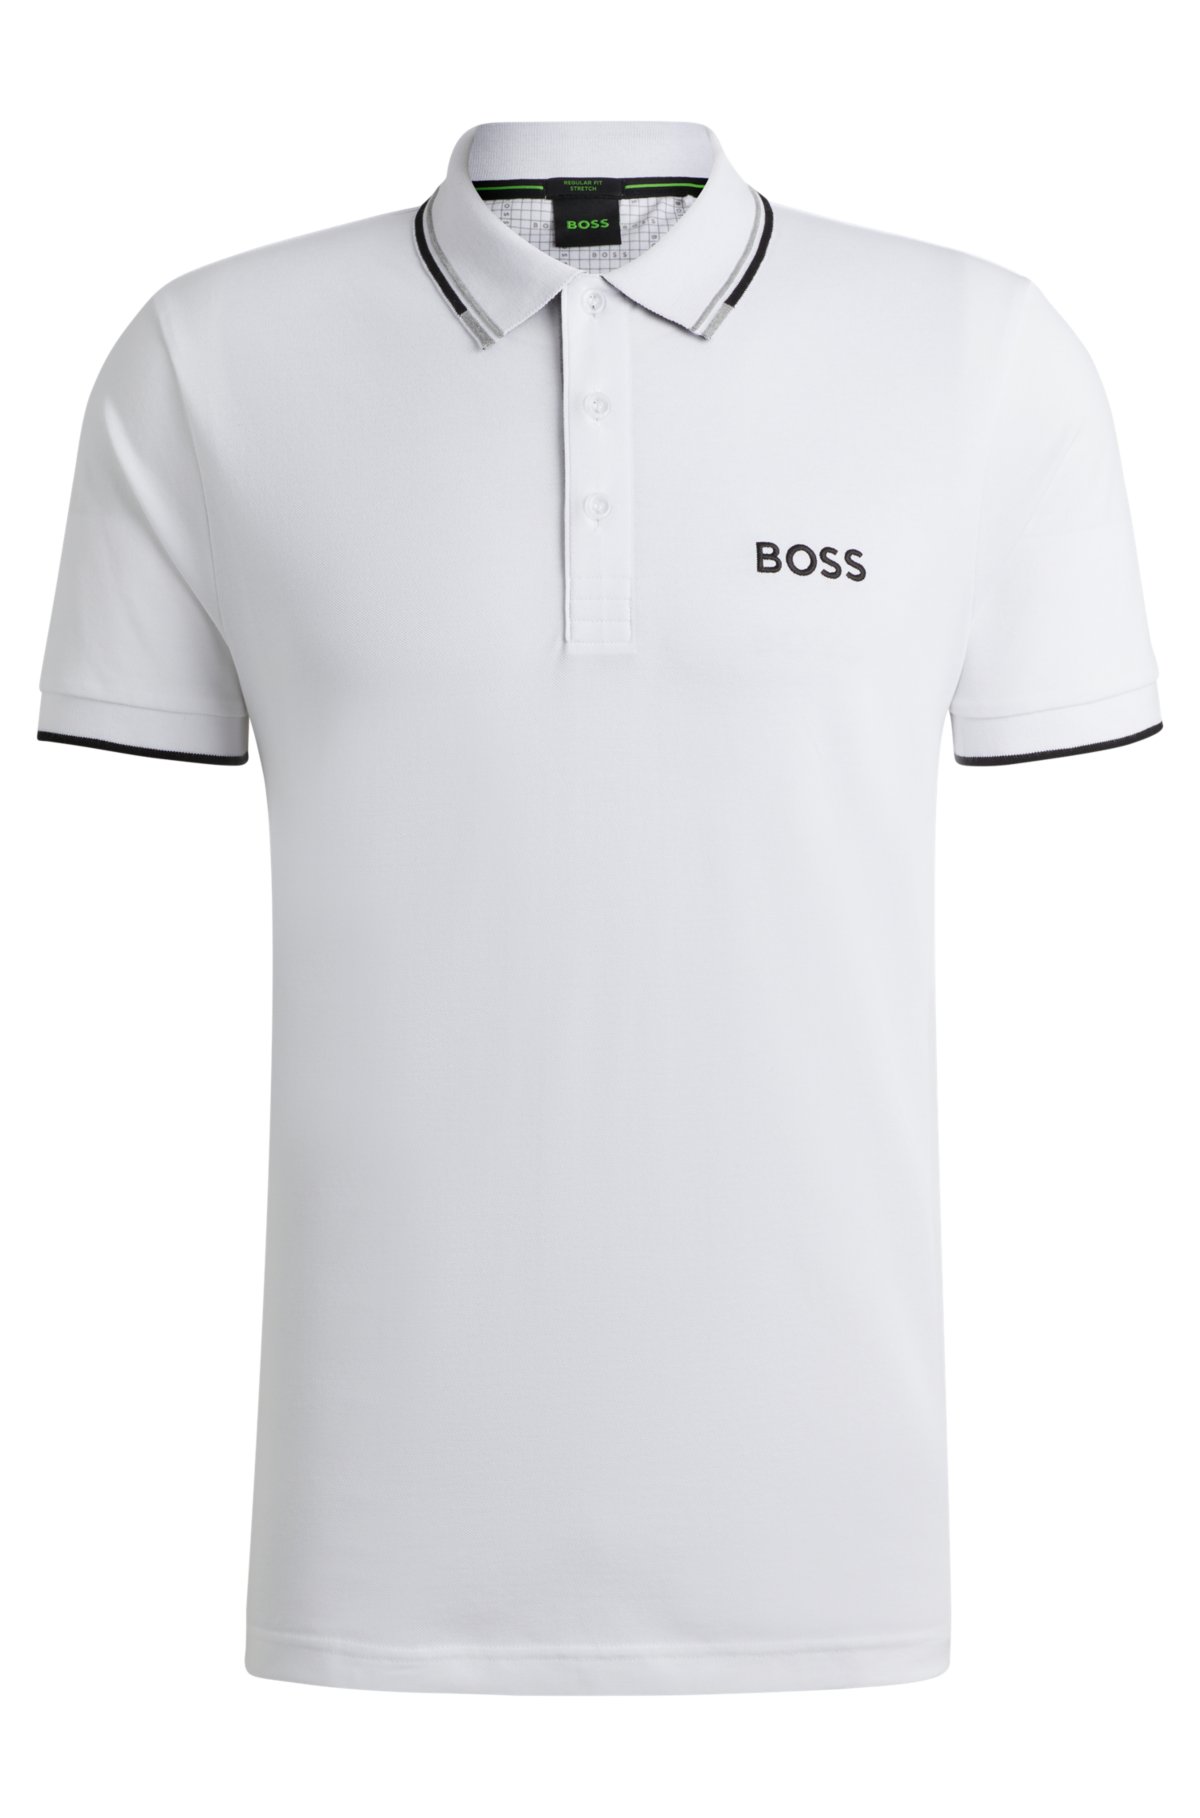 contrast - Polo with BOSS logos shirt